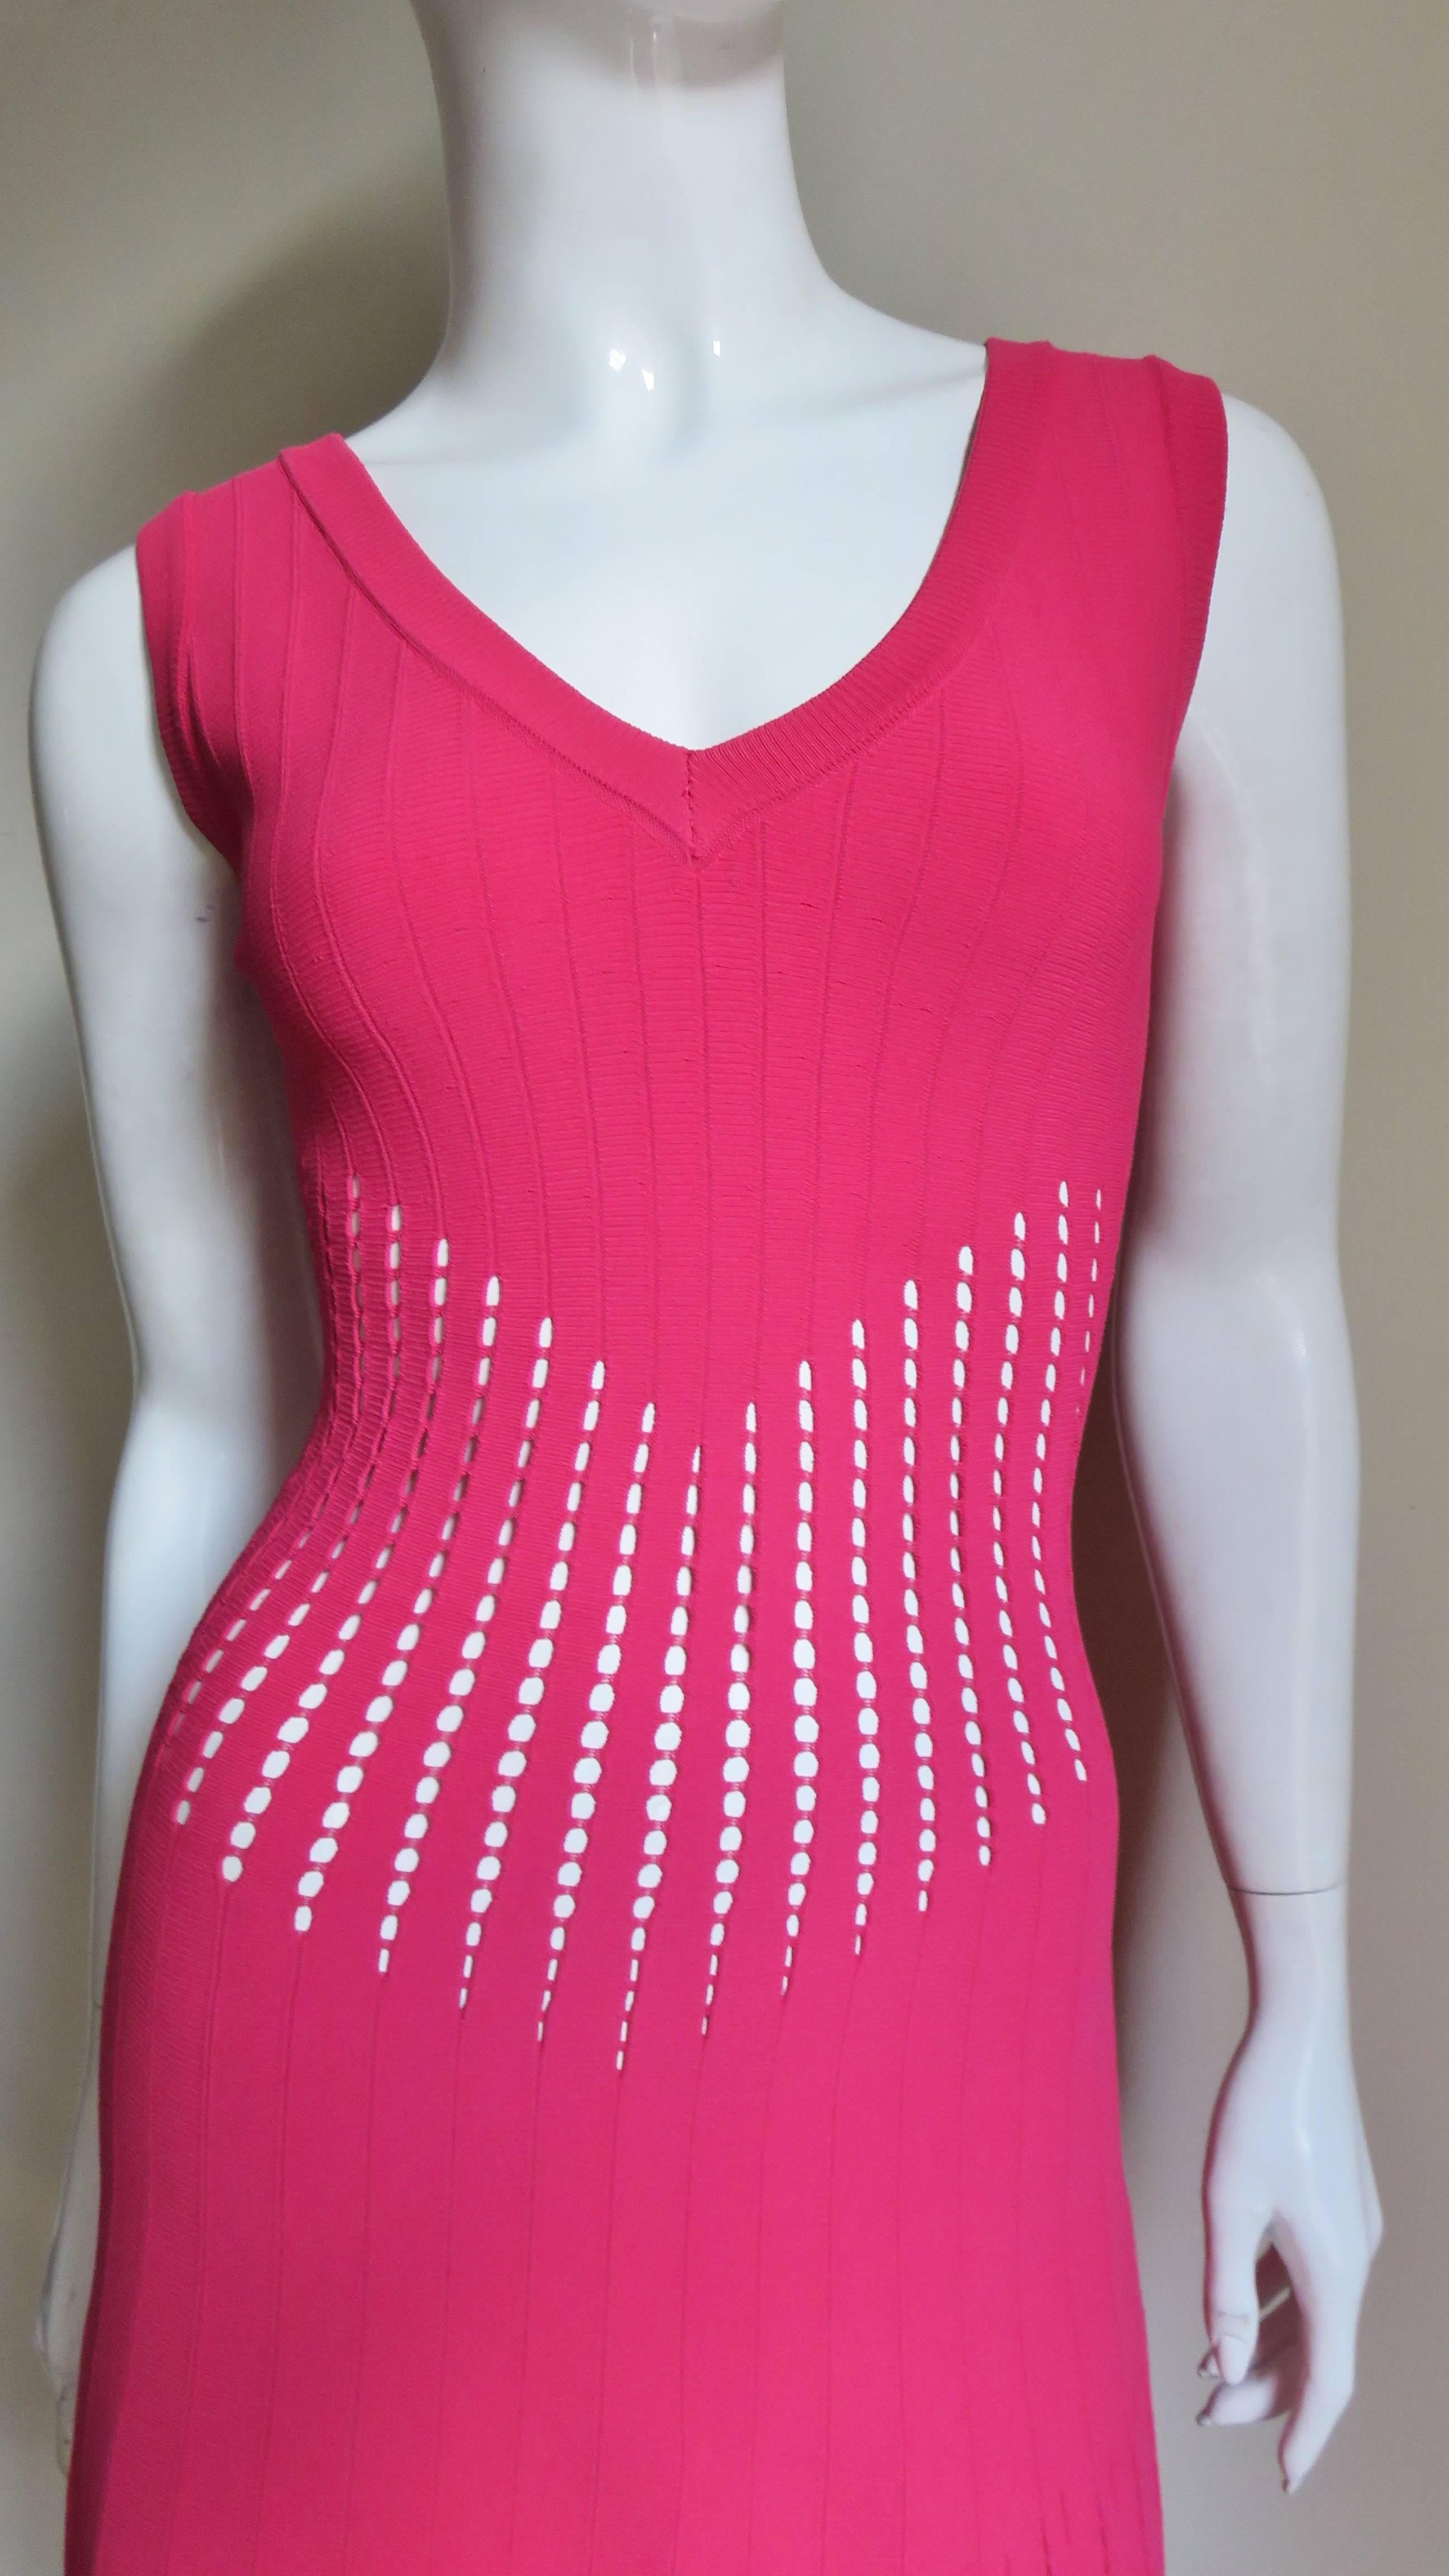 A gorgeous bight pink bandage dress from Azzedine Alaia comprised of 1